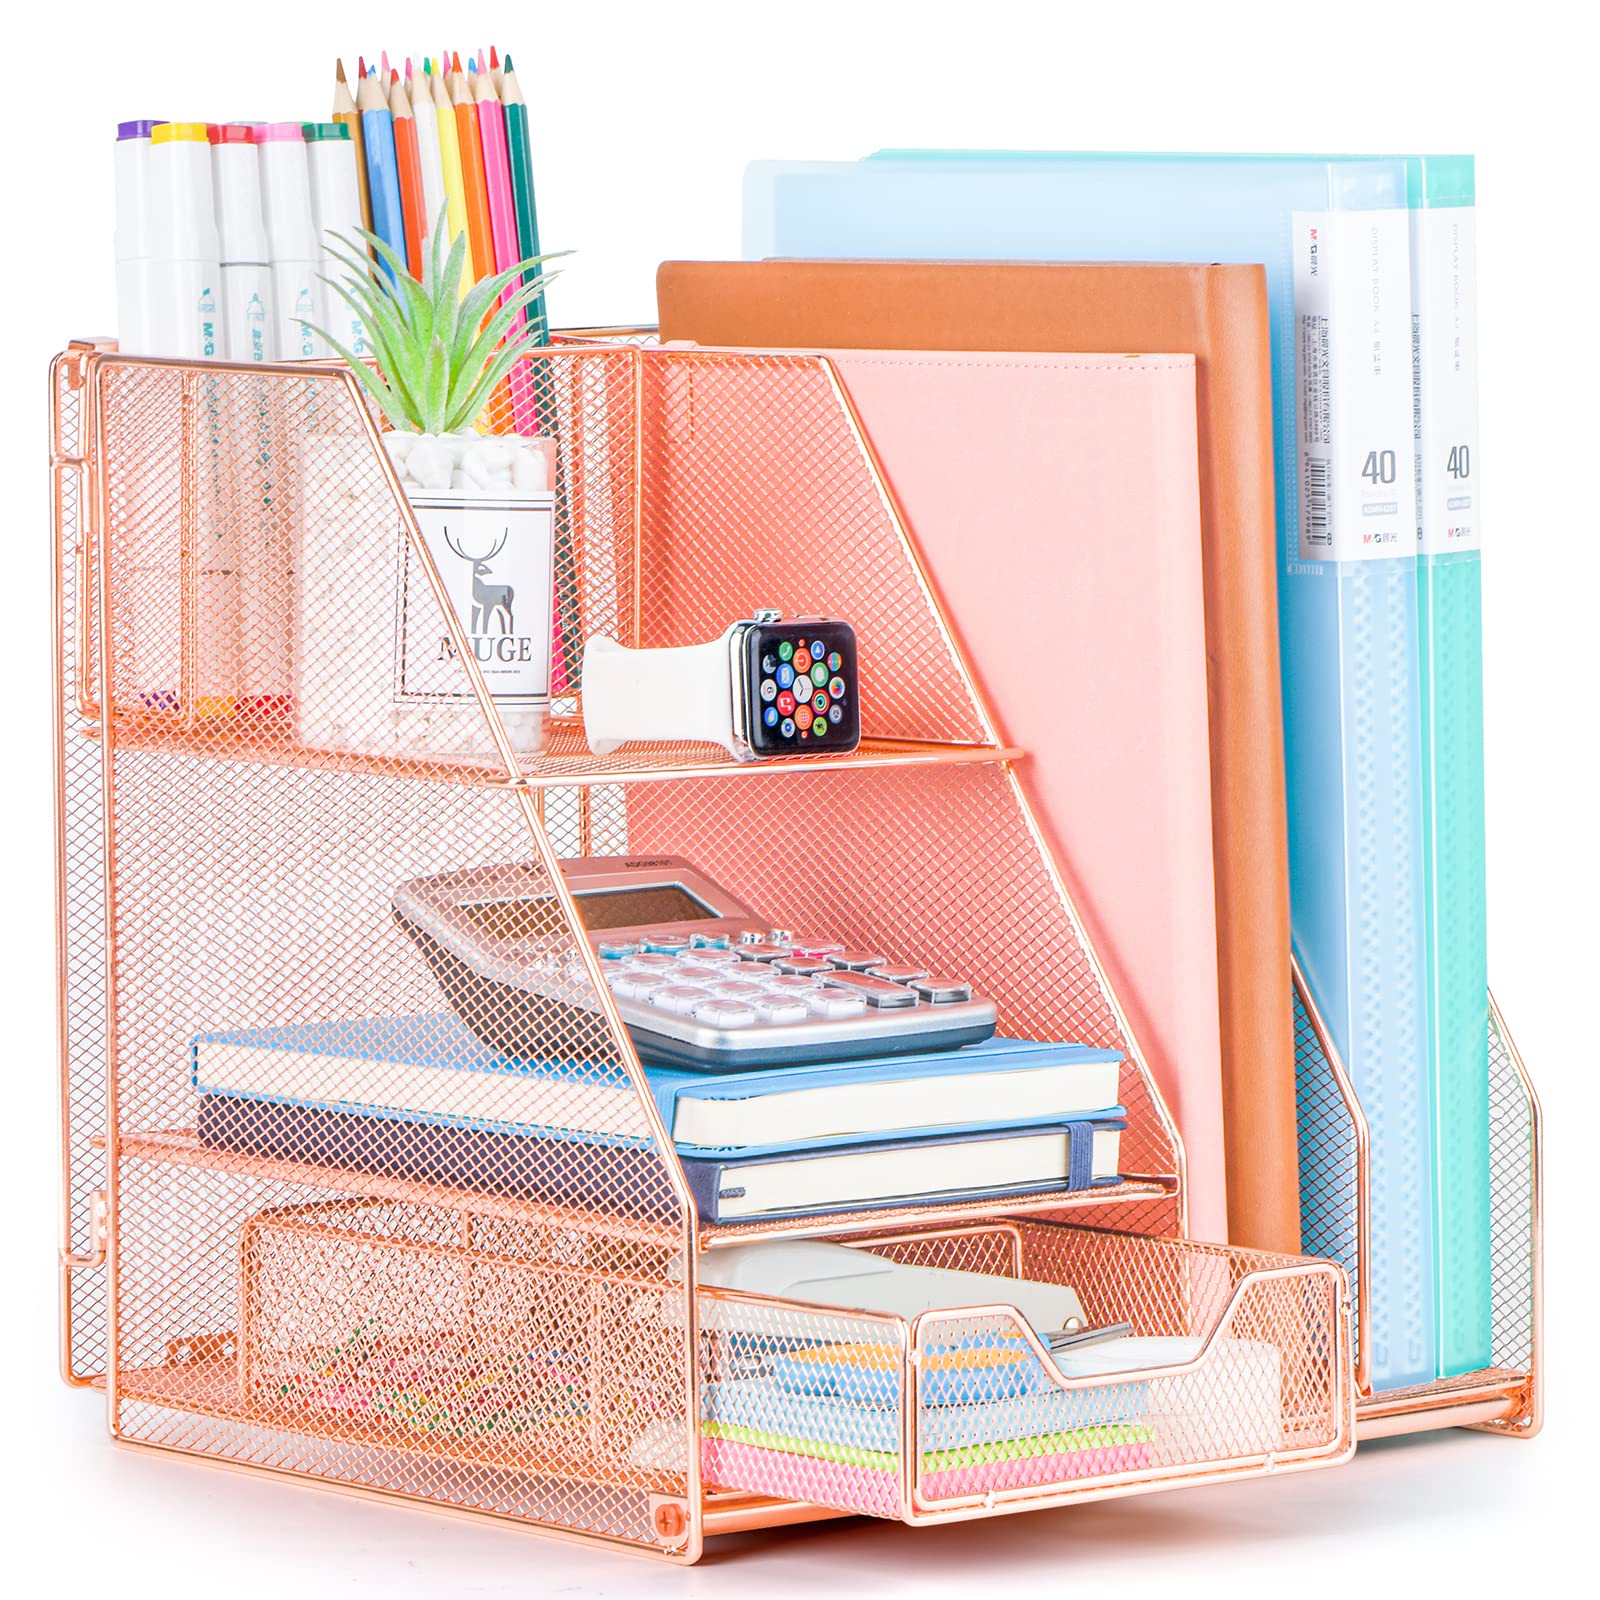 Topwey Rose Gold Desk Accessories, Office Supplies Desk Organizer Caddy with Sliding Drawer, Double Tray, File Organizer and pen holder